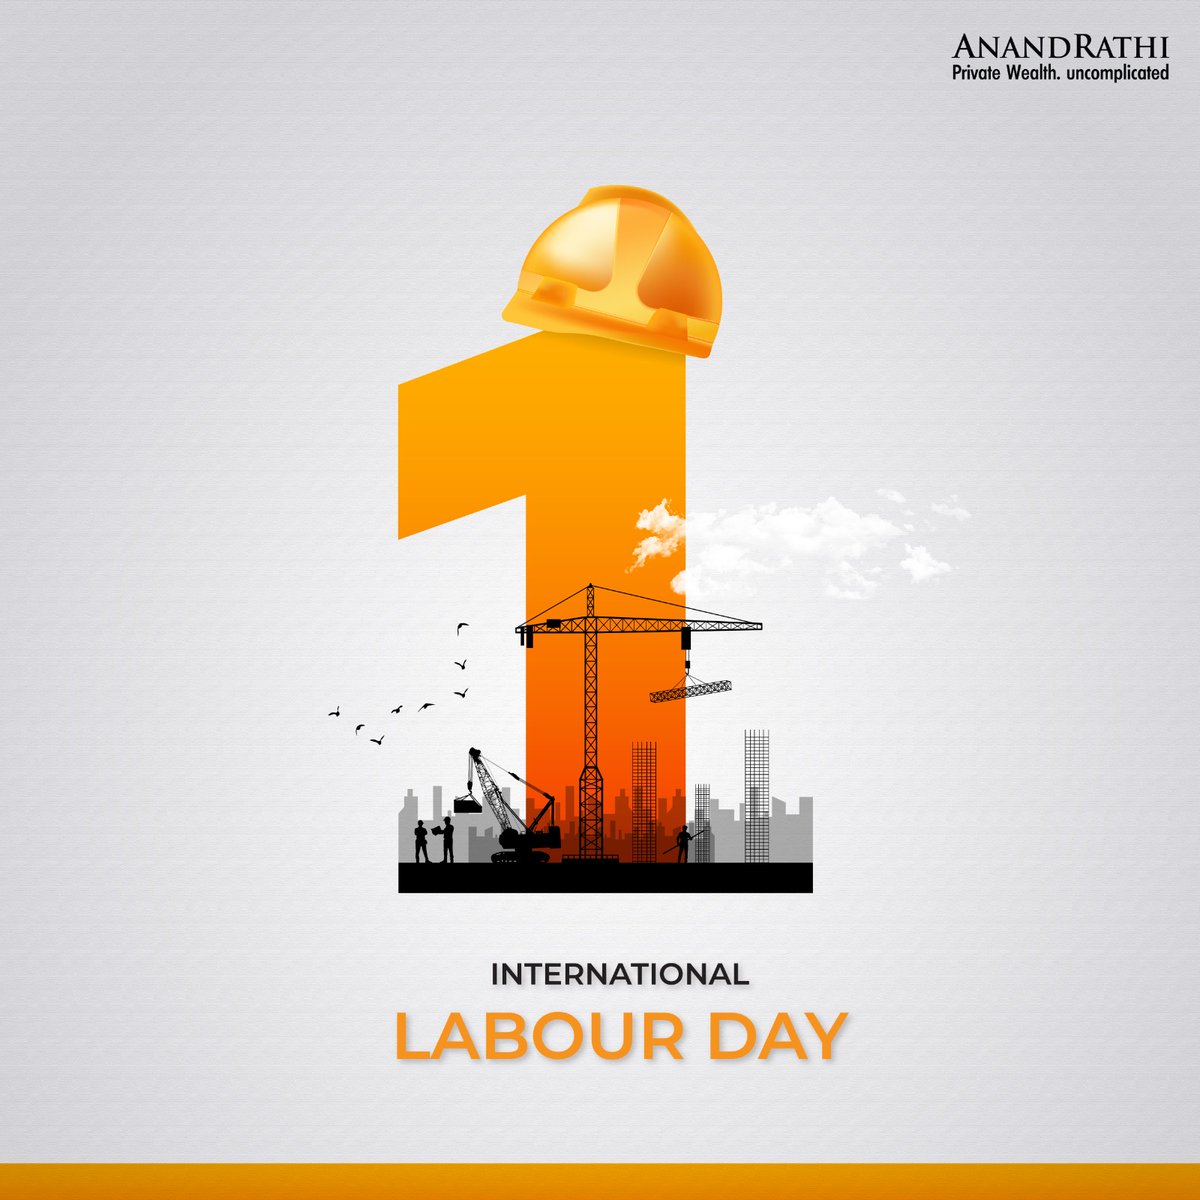 Wishing all a Happy International Labour Day!

Know more: anandrathiwealth.in/landing

#mathematicalrevolution #financialplanning #wealthmanagement #anandrathiwealth #anandrathi  #india #investment #investor #investmentideas #databacked #LeadershipInsights #RiskManagement